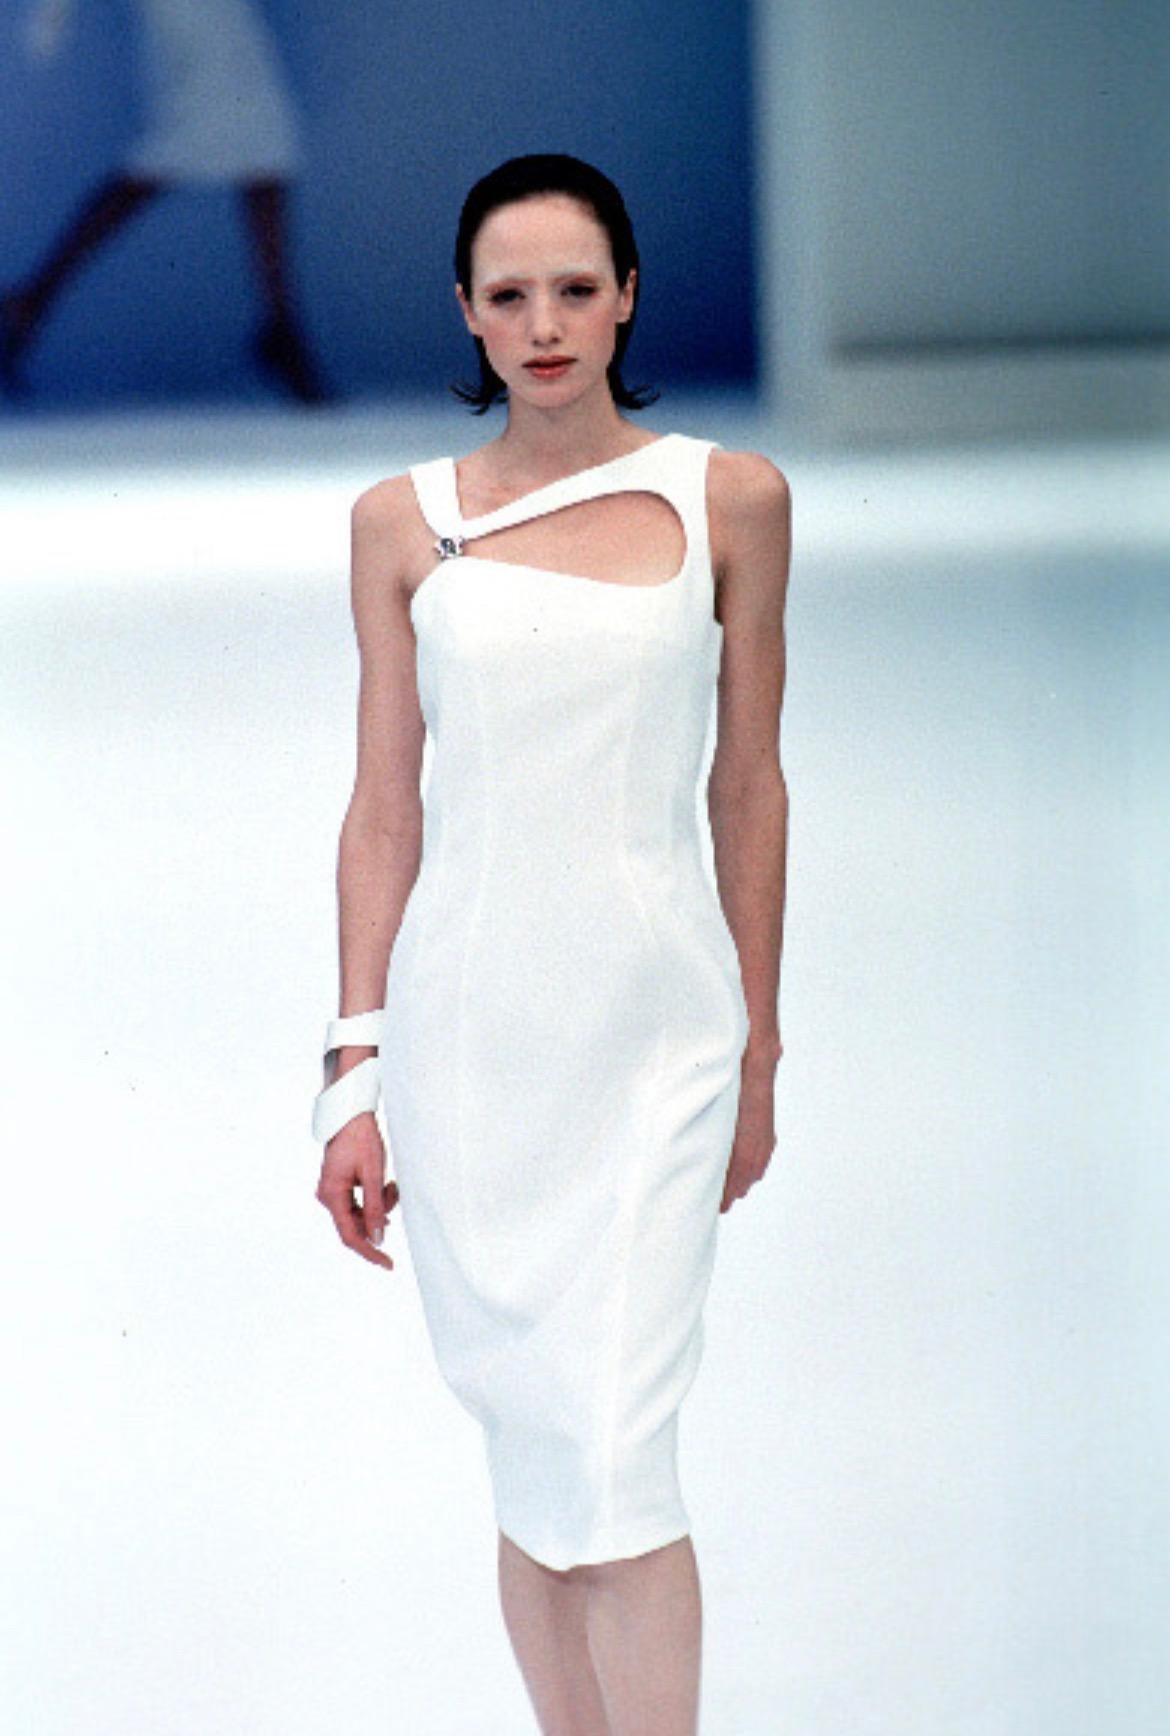 Presenting a beautiful black and silver Thierry Mugler gown, designed by Manfred Mugler. From the Spring/Summer 1999 collection, a shortened version of this unique gown debuted on the season's runway in all white and in all black. Featuring an